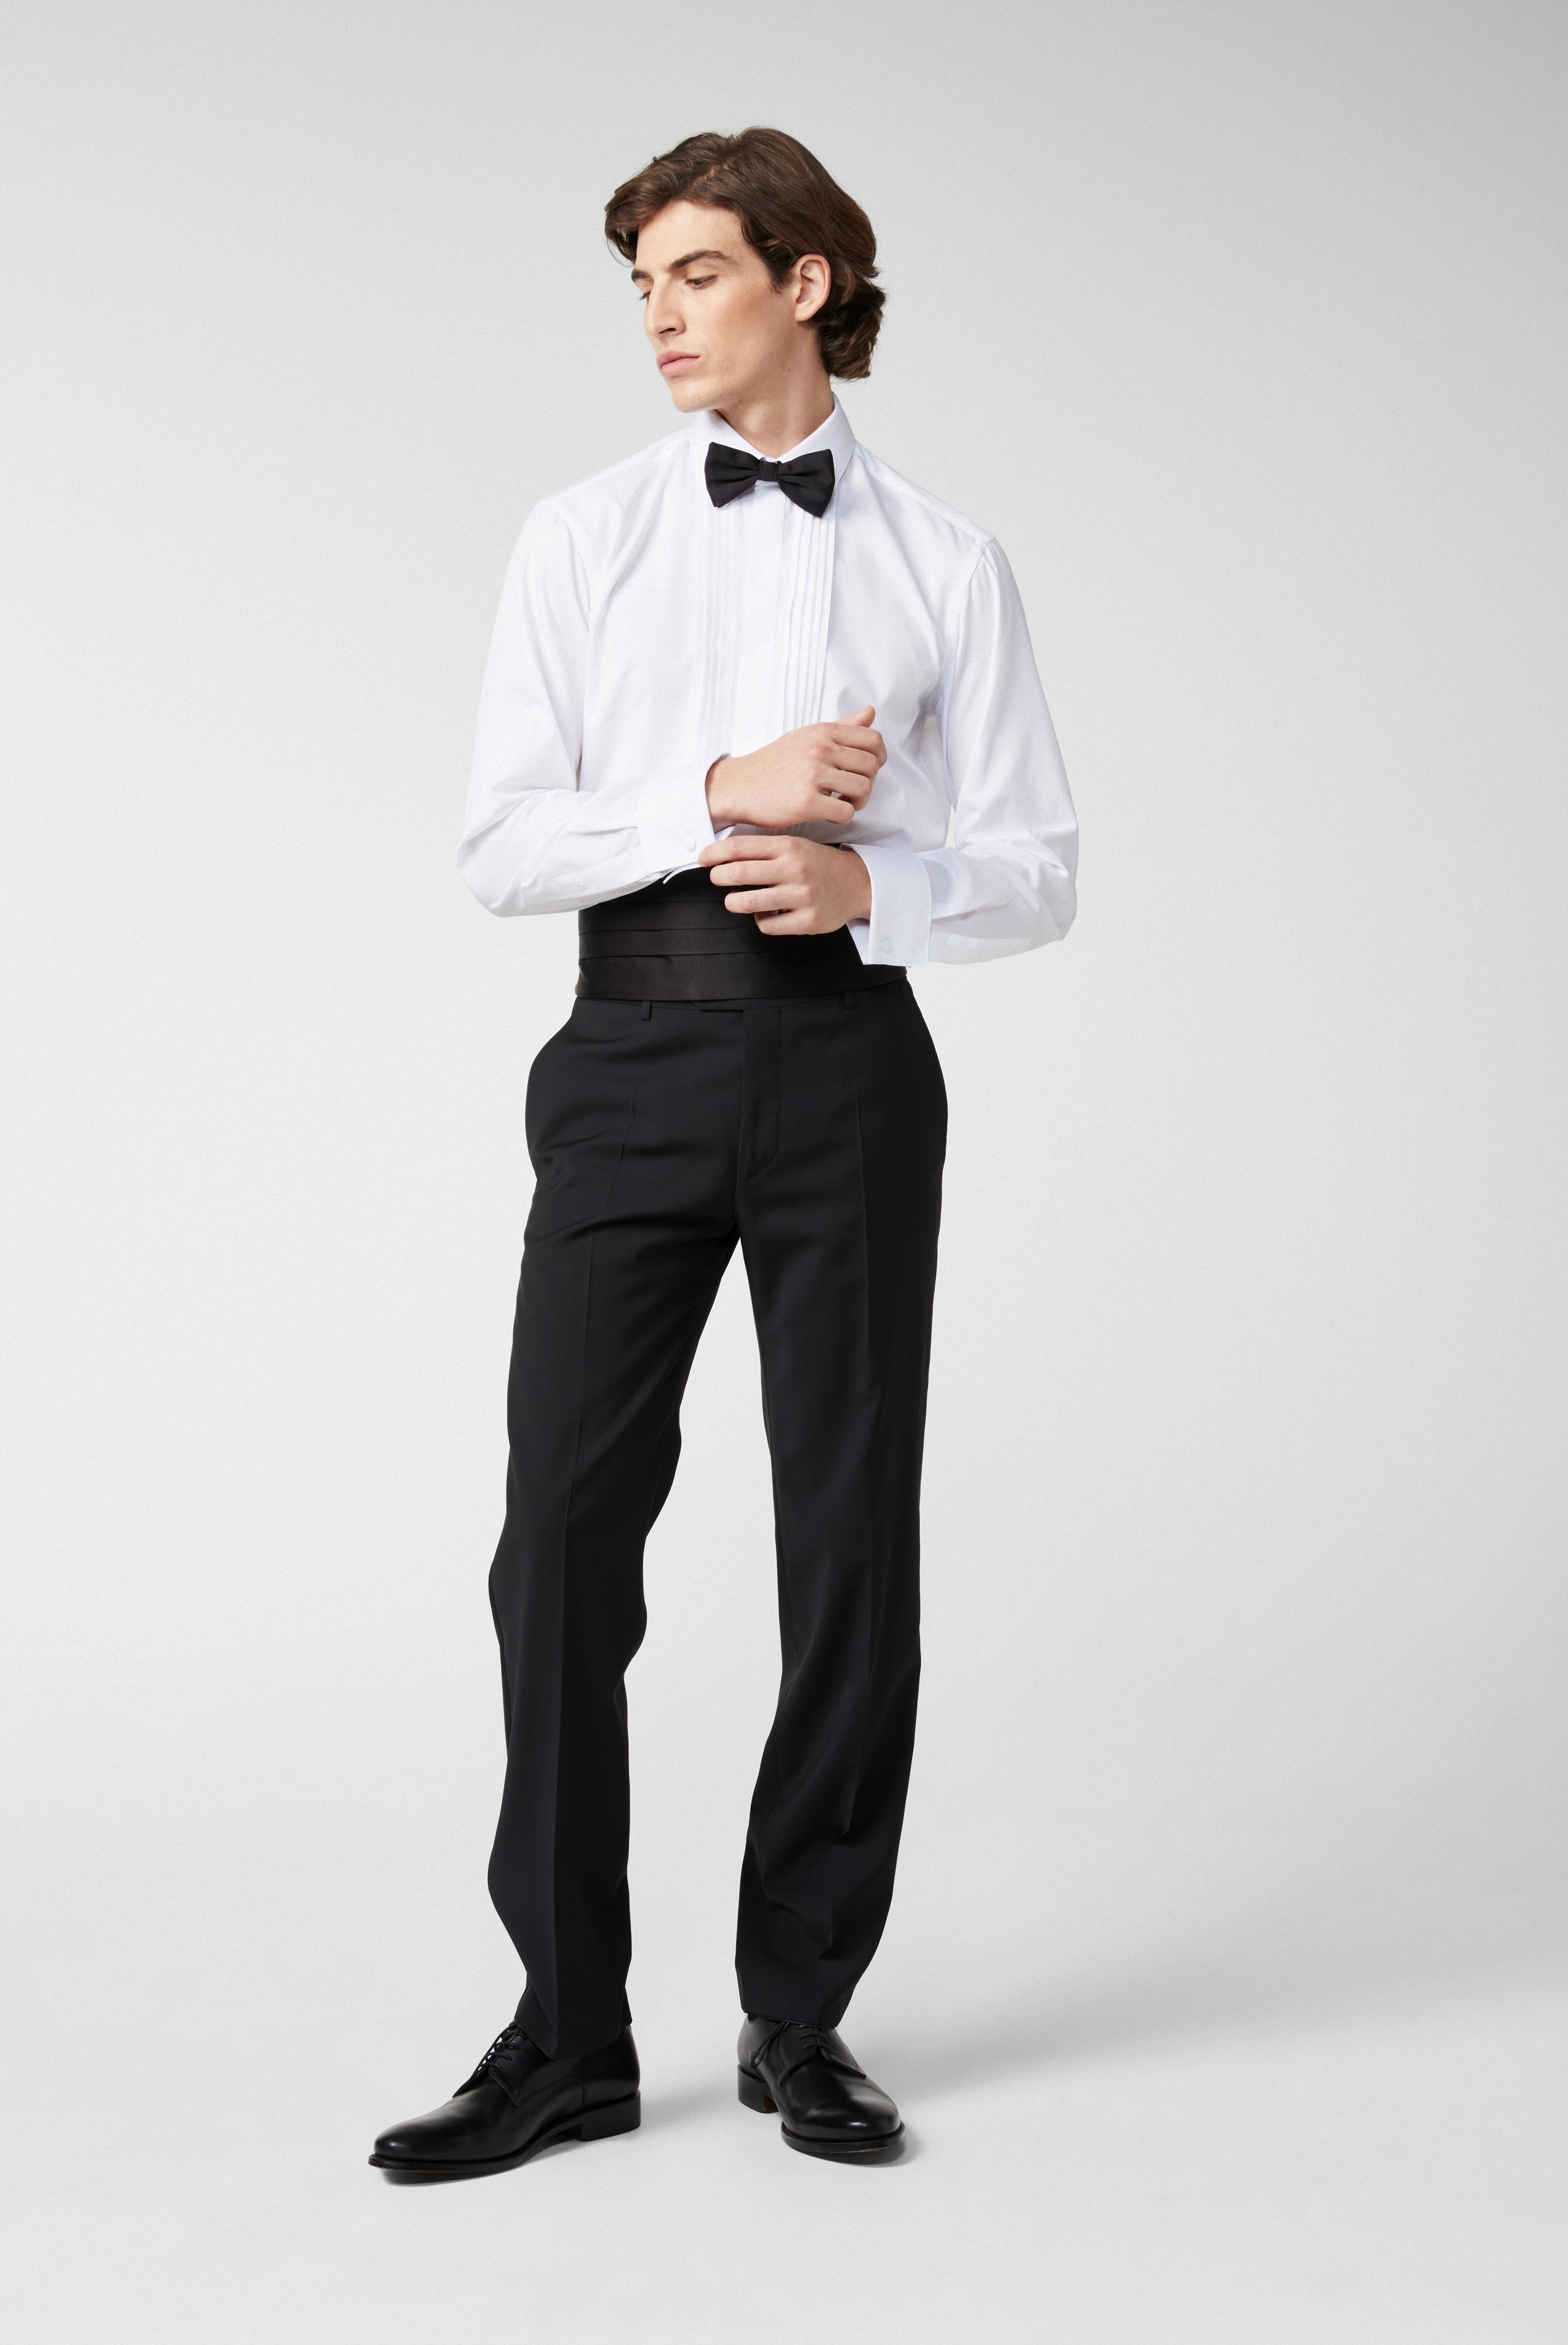 Business Shirts+Tuxedo Shirt with Pleated Panel Tailor Fit+20.2066.NV.130648.000.37